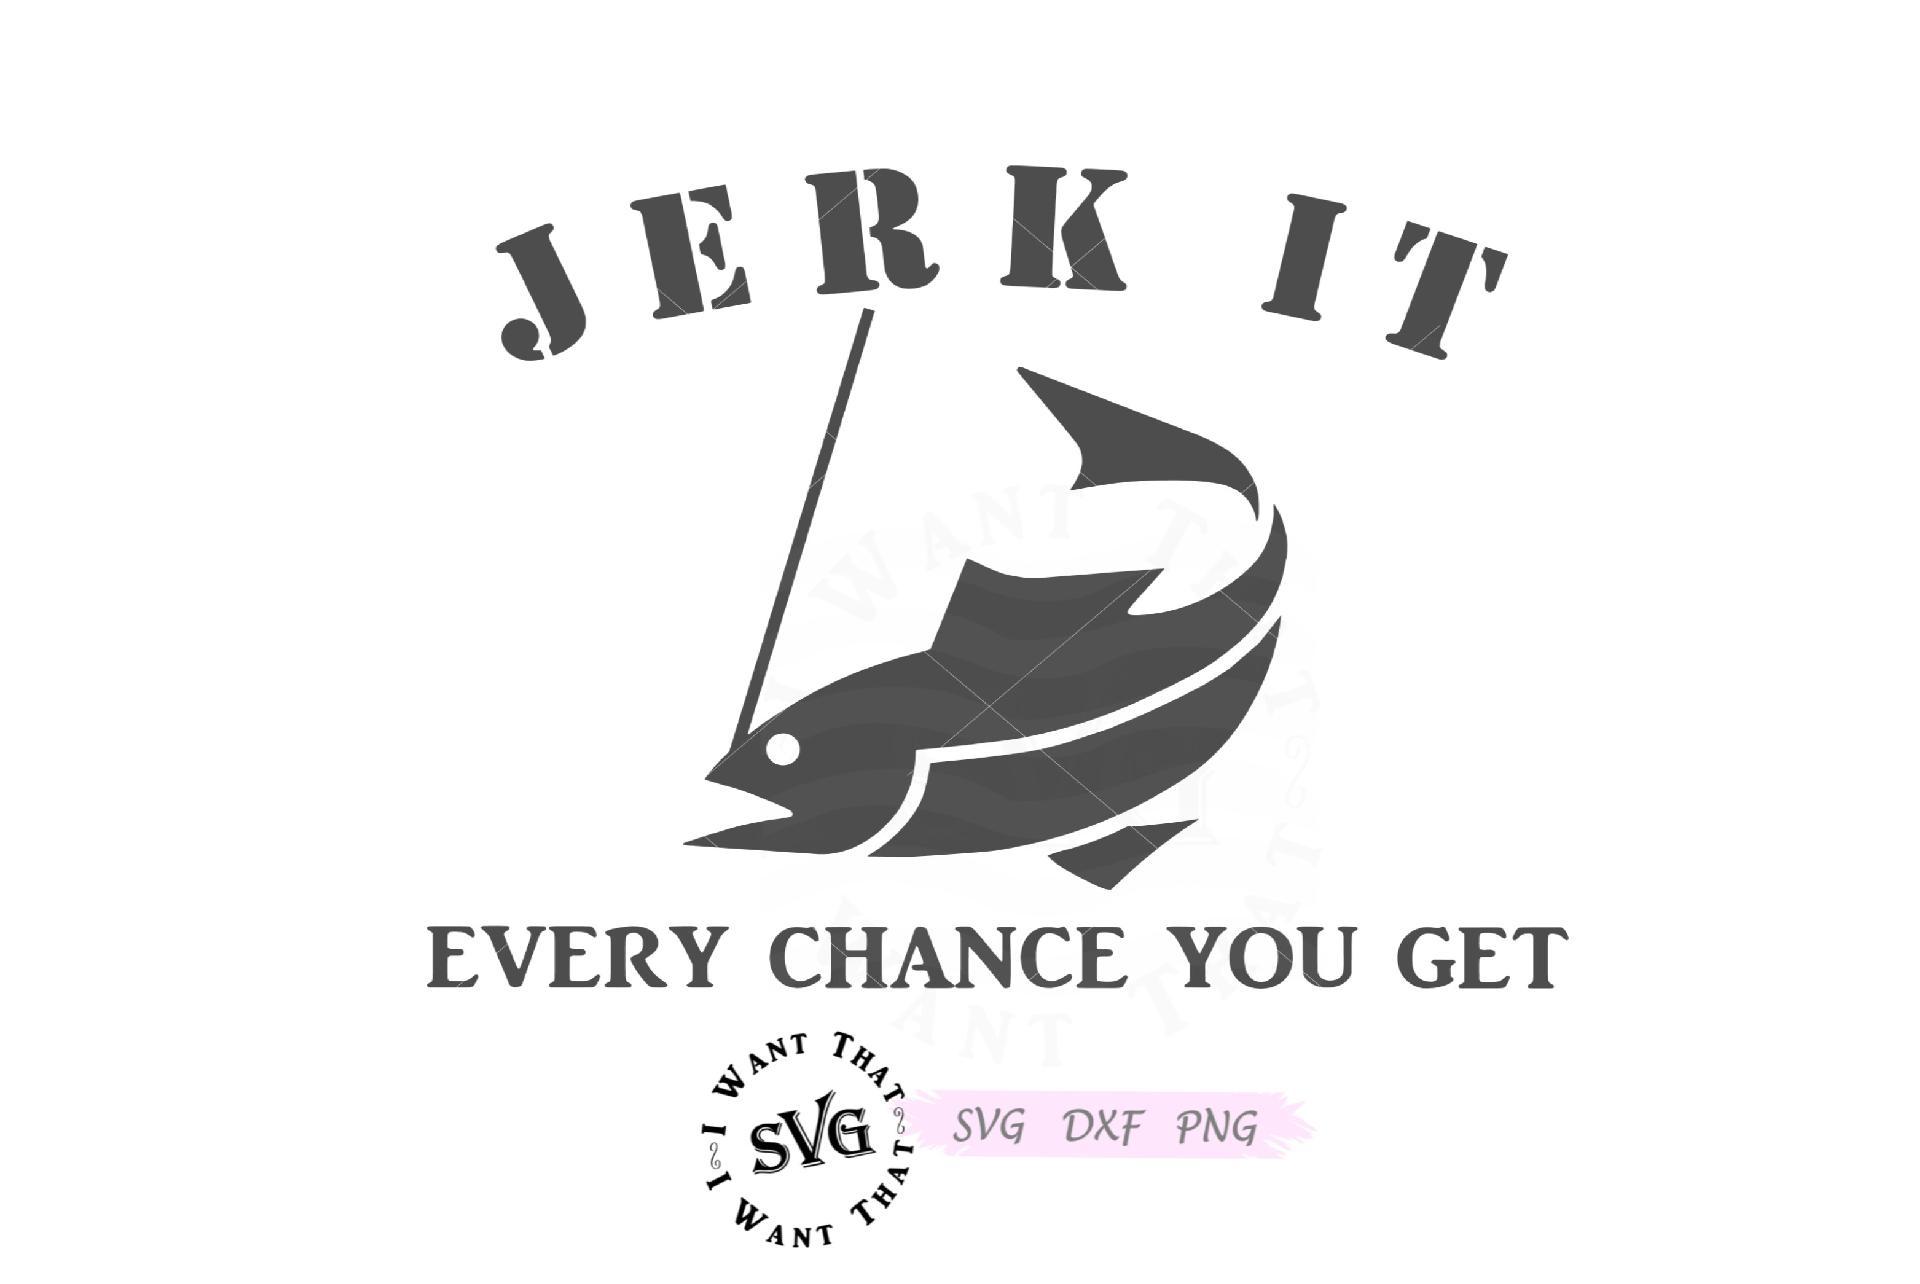 Download Jerk It Every Chance You Get With Fish So Fontsy